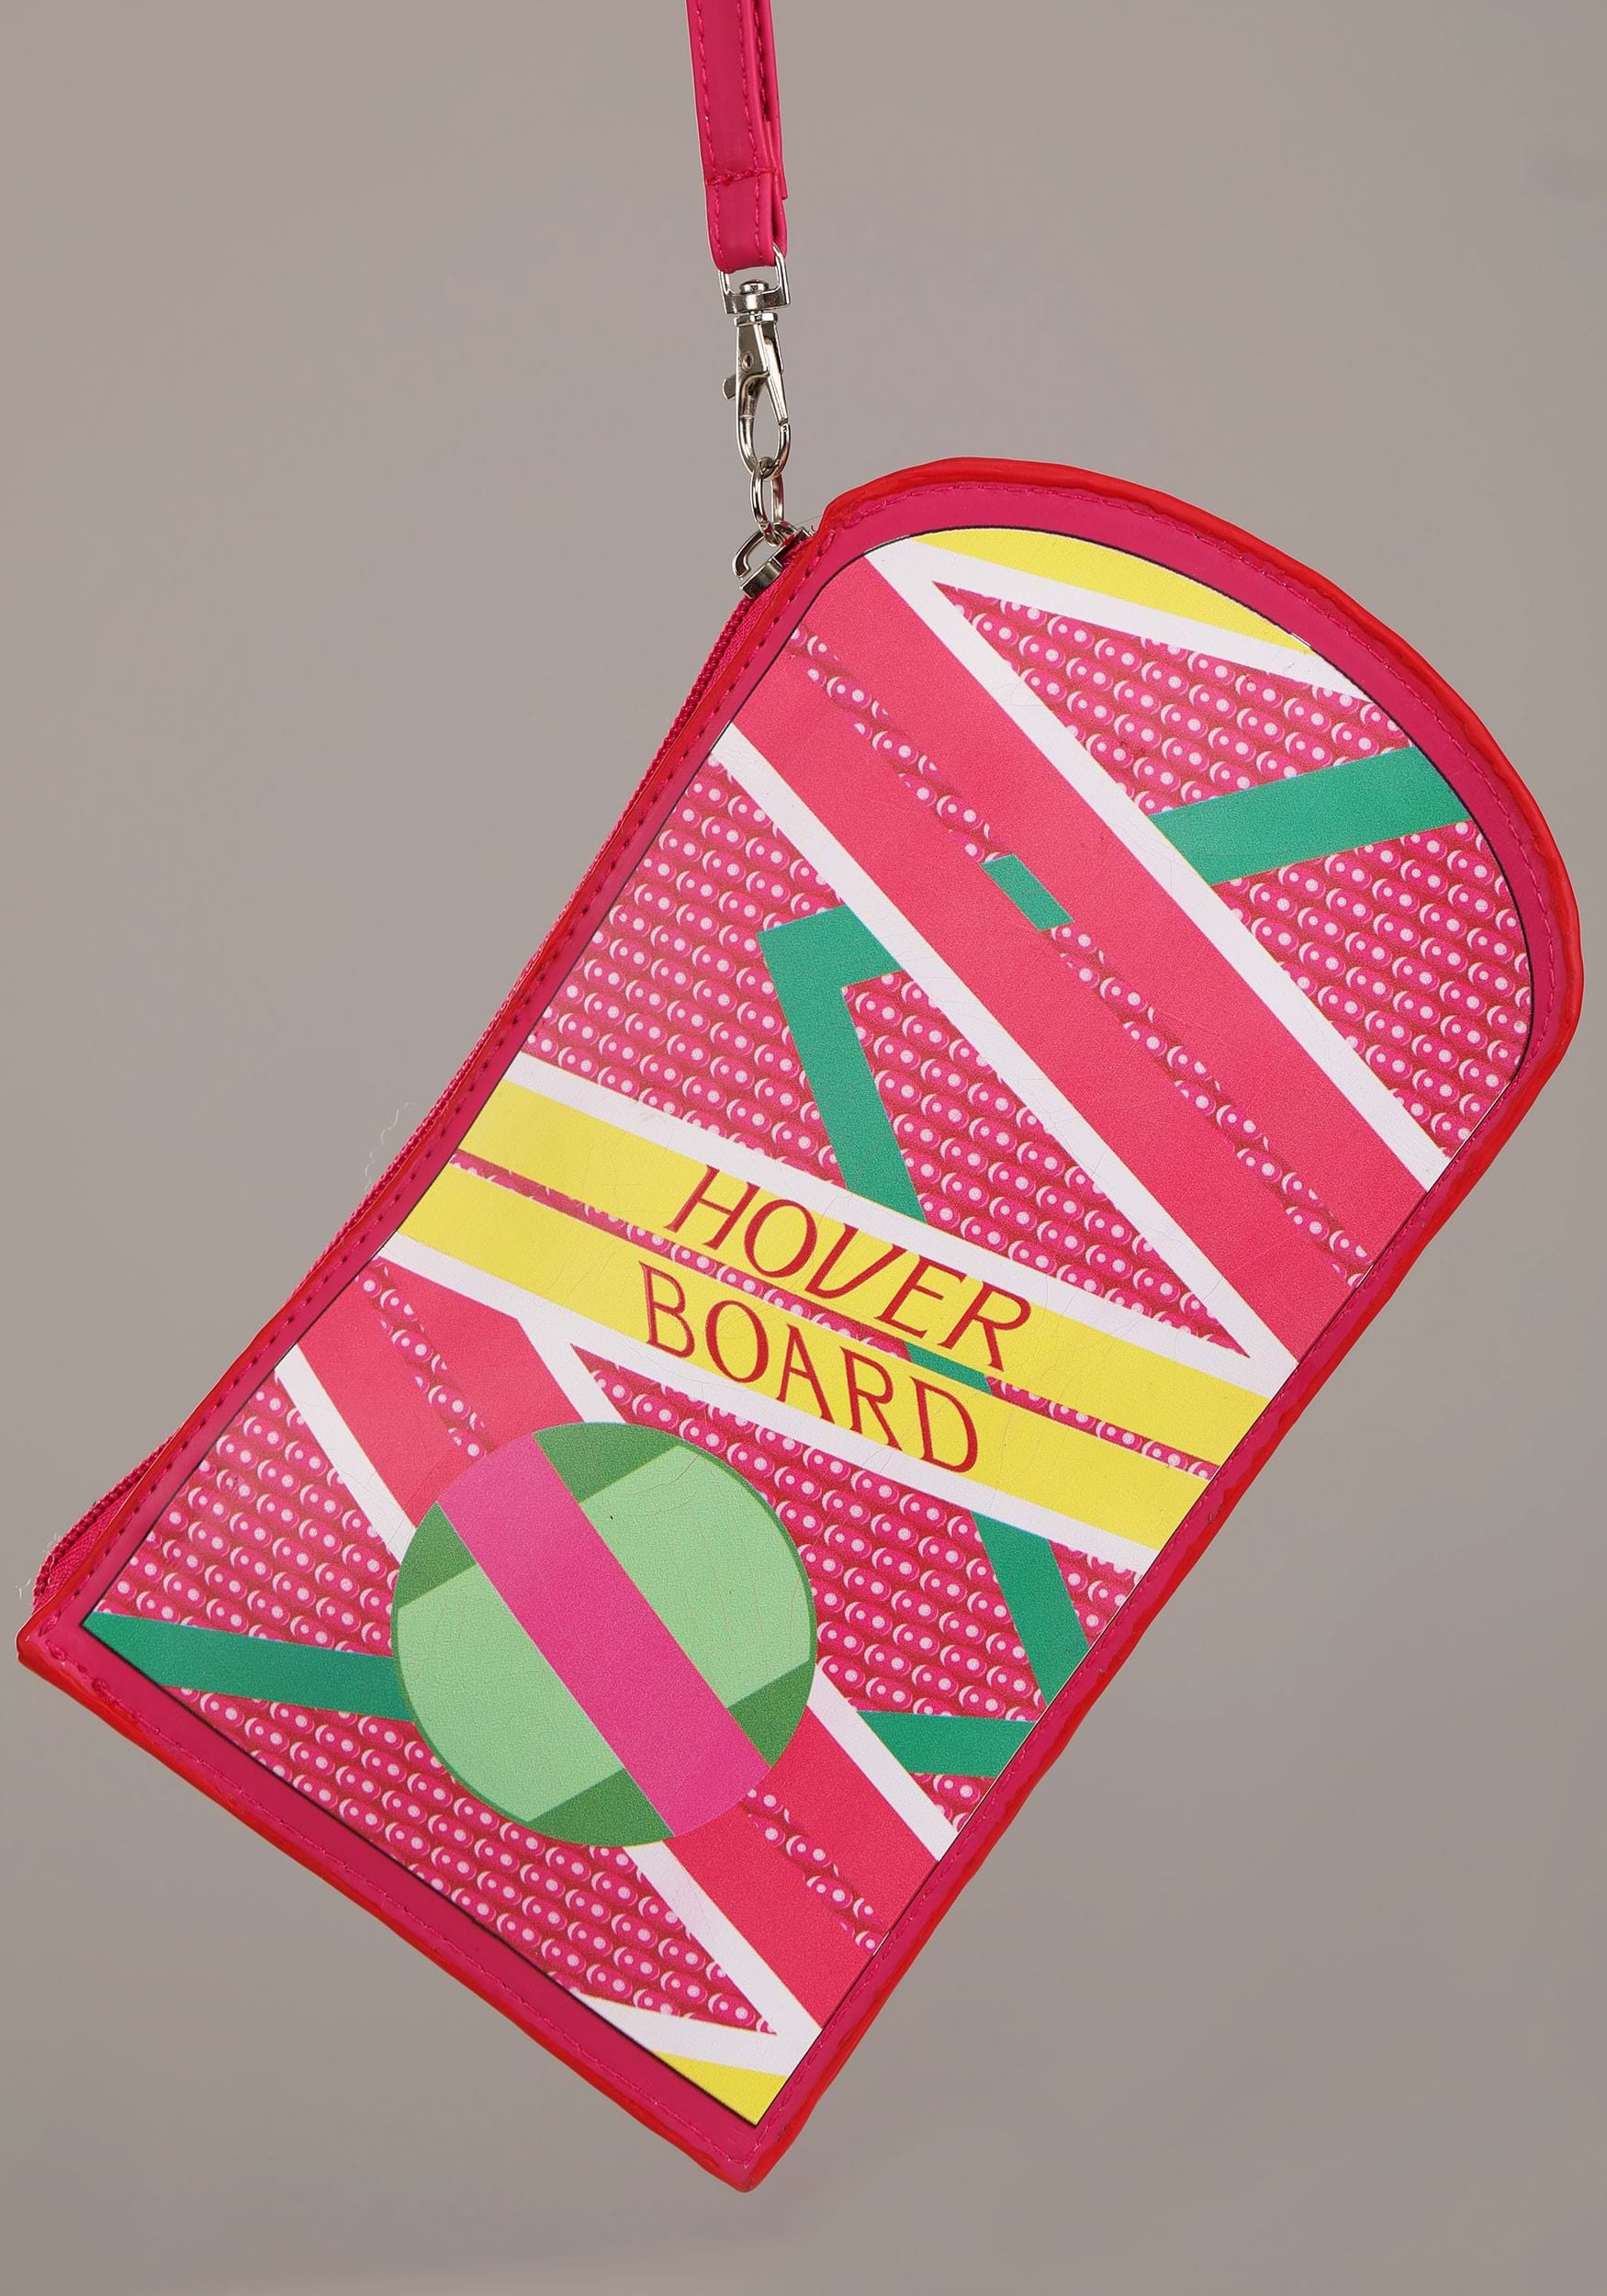 Back To The Future II Hoverboard Clutch Accessory